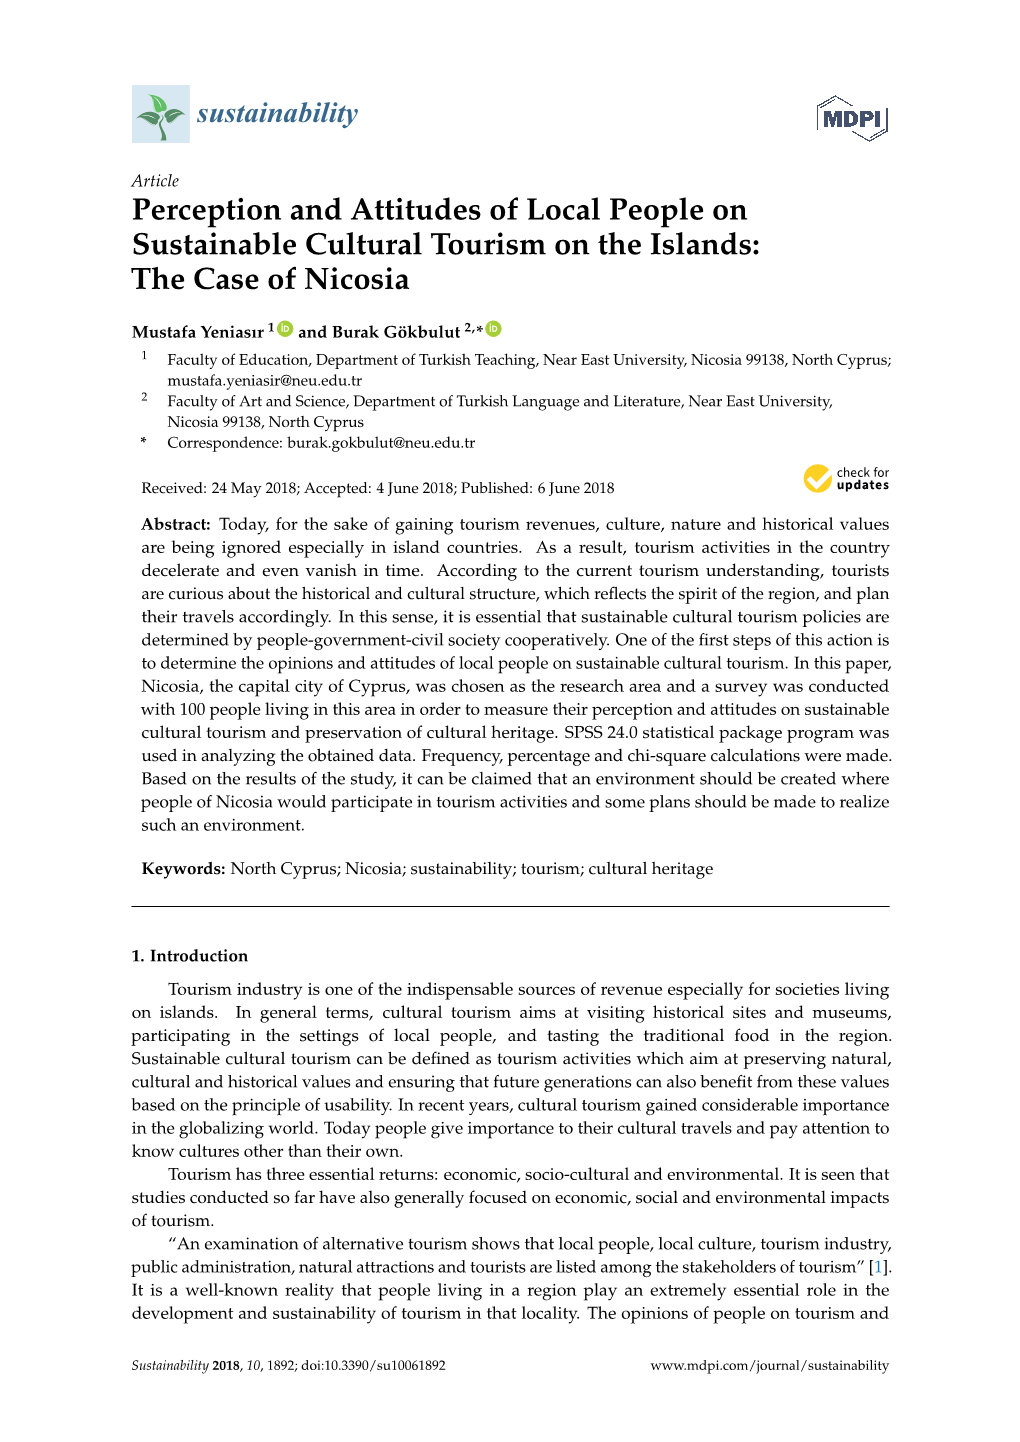 Perception and Attitudes of Local People on Sustainable Cultural Tourism on the Islands: the Case of Nicosia